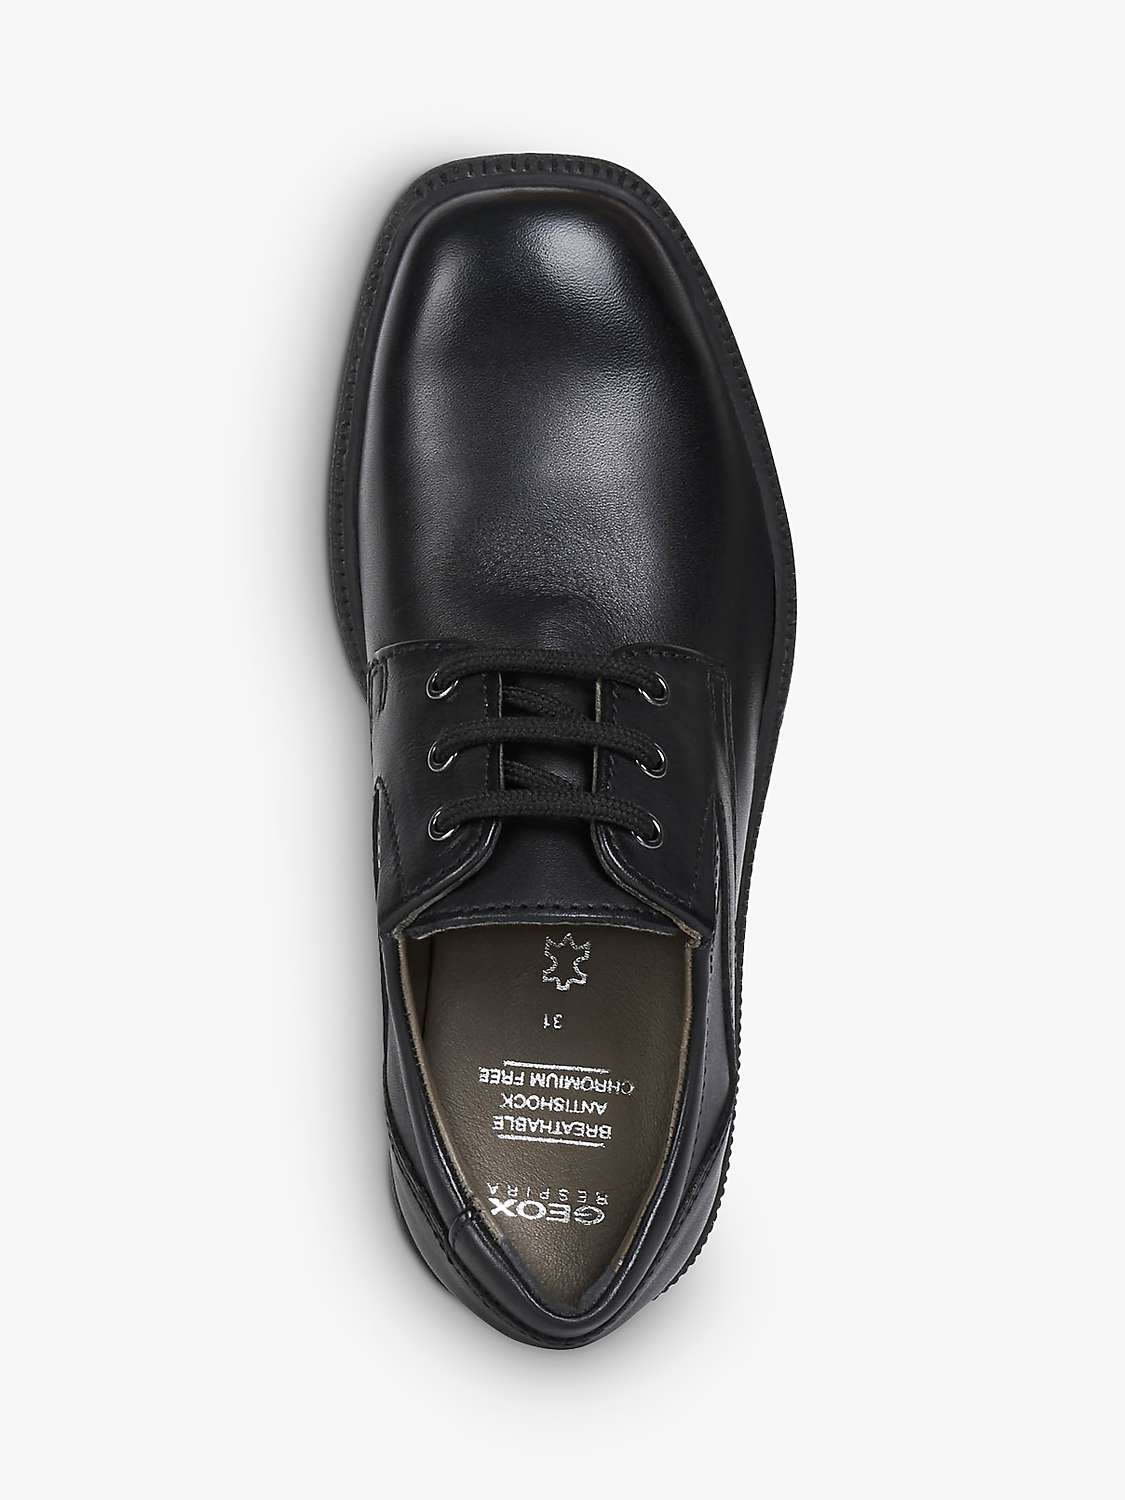 Geox Kids' Federico Laced Shoes, Black at John Lewis & Partners